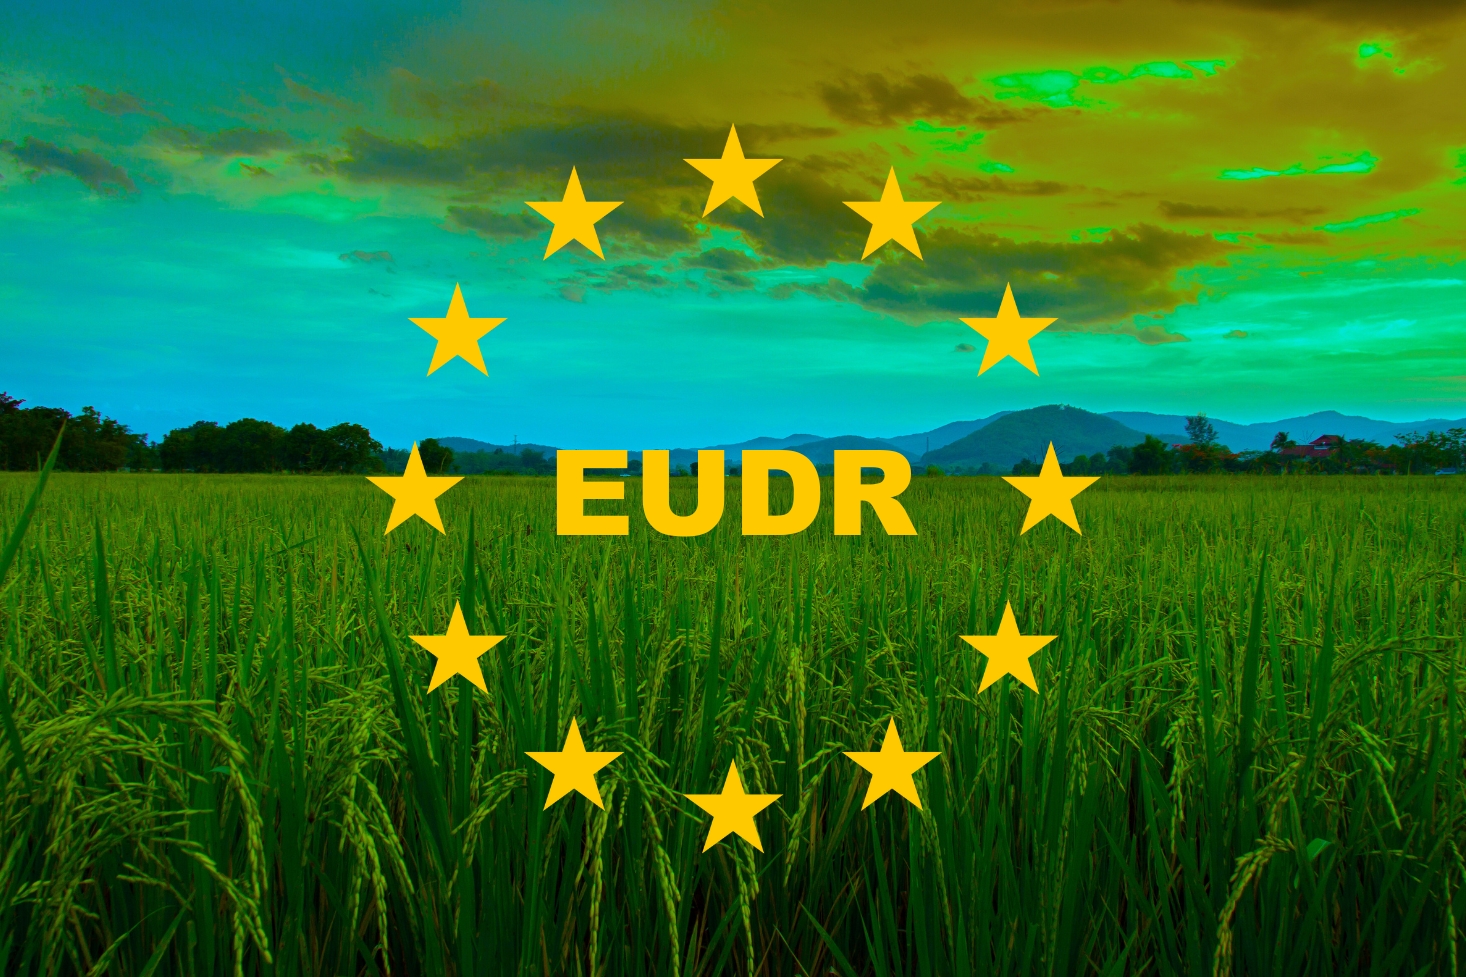 EUDR: To Protect the Forests, Protect the People